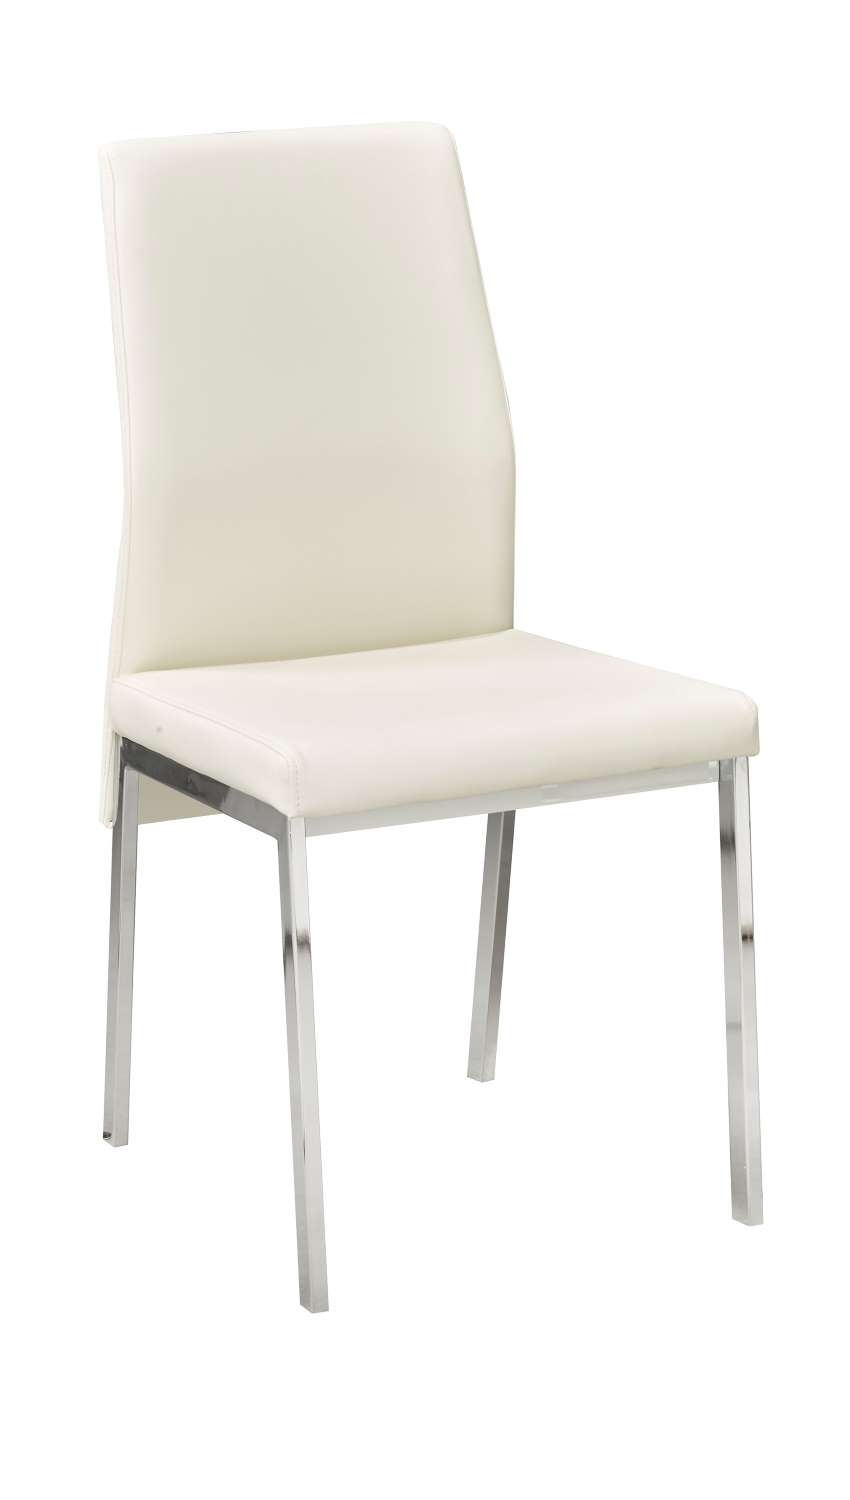 Amberley Dining Chair - White